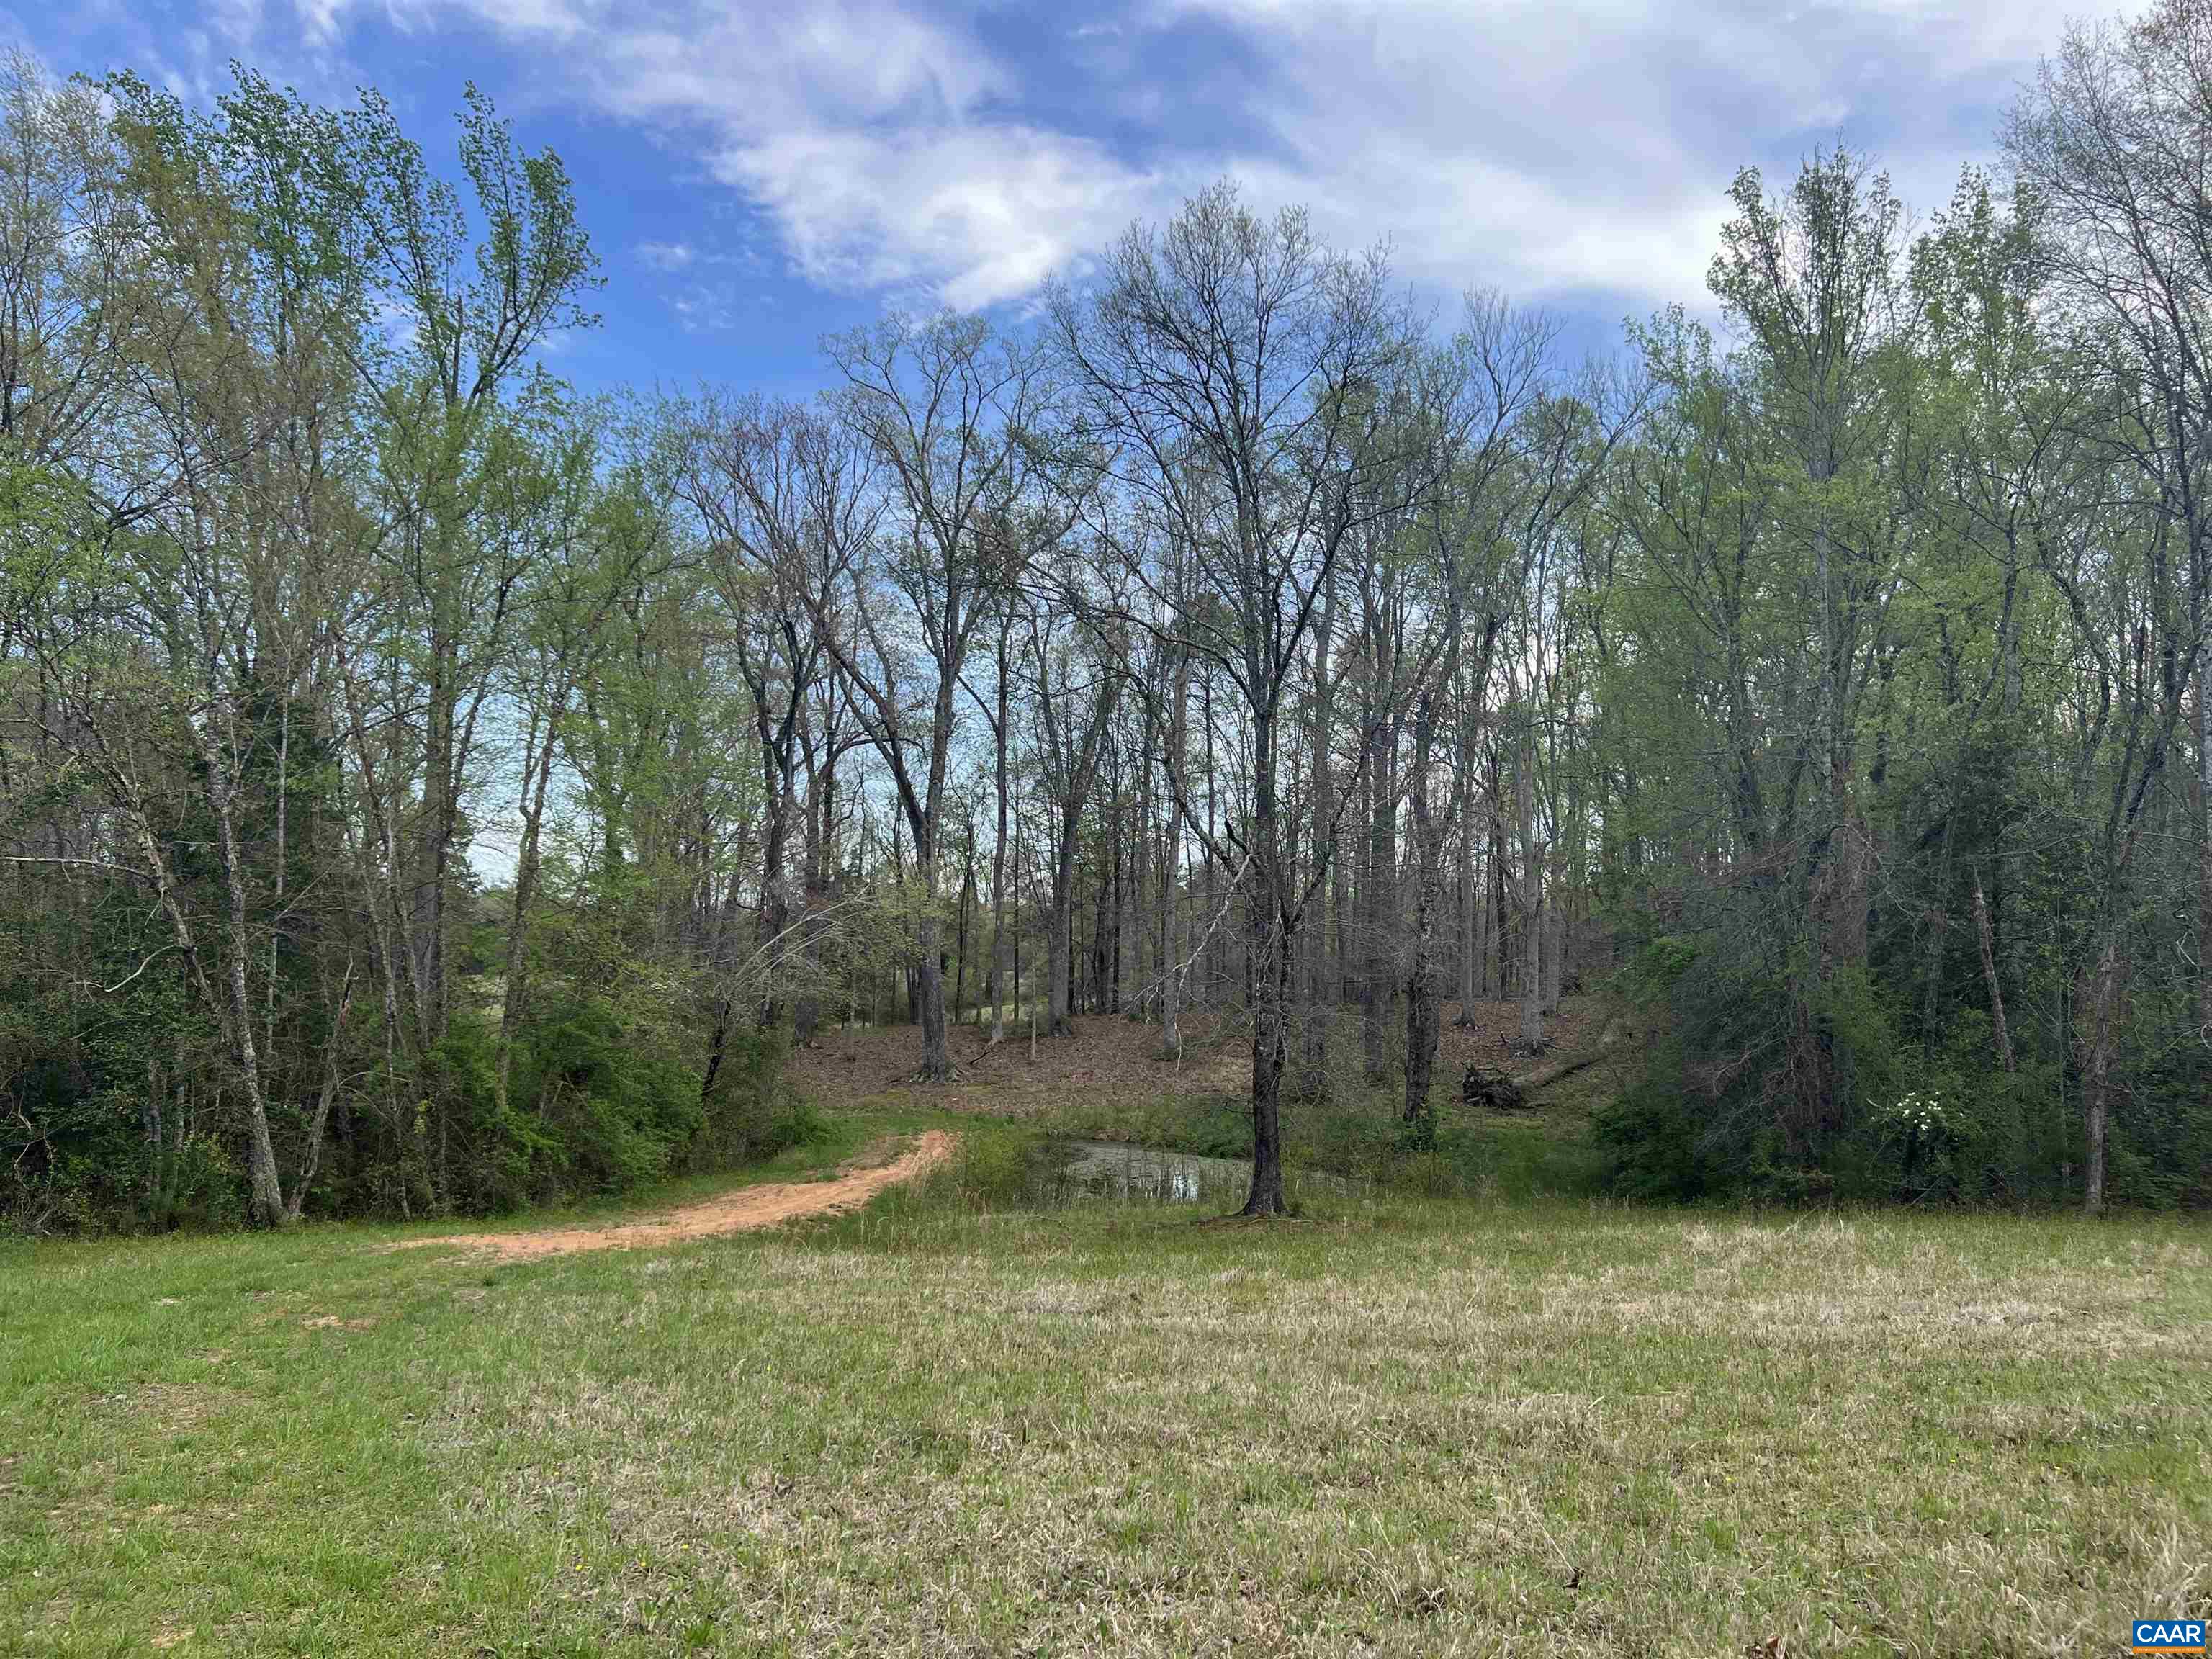 Tired of city life? Escape to the country & build your home on a knoll above the pond or on one of the other great home sites.  Bring your horses too!  Currently used for hay and corn production but would make a lovely 26+ acre homestead.  Prime location off US 522 with access to I-64 (20 minutes to Short Pump & 40 minutes to downtown Richmond or Charlottesville). Two parcels being sold together w/ good road frontage.  Come walk the land and experience the beauty for yourself!